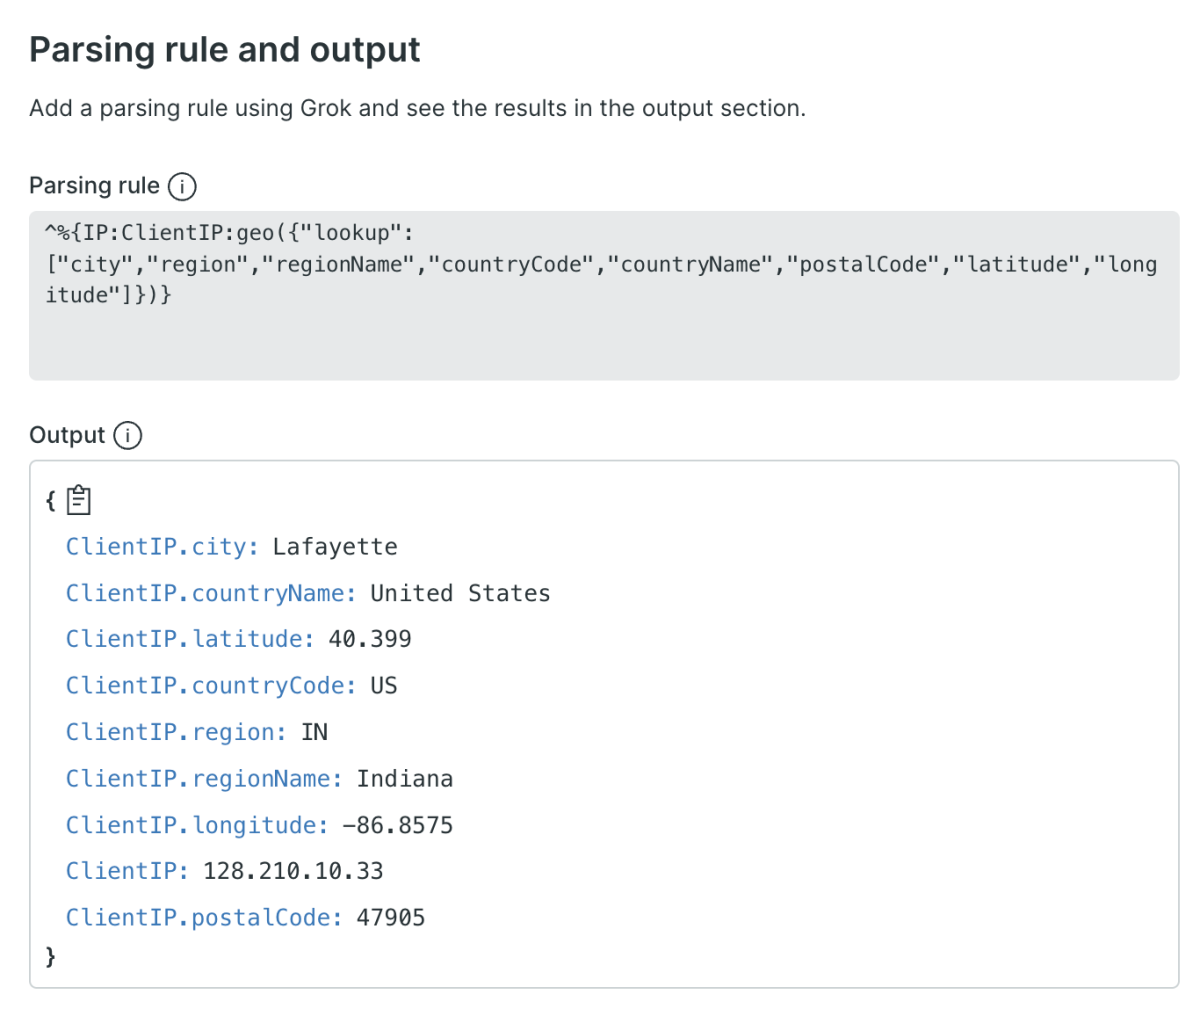 Screenshot of adding a parsing rule using New Relic Grok to see the results in the output section.